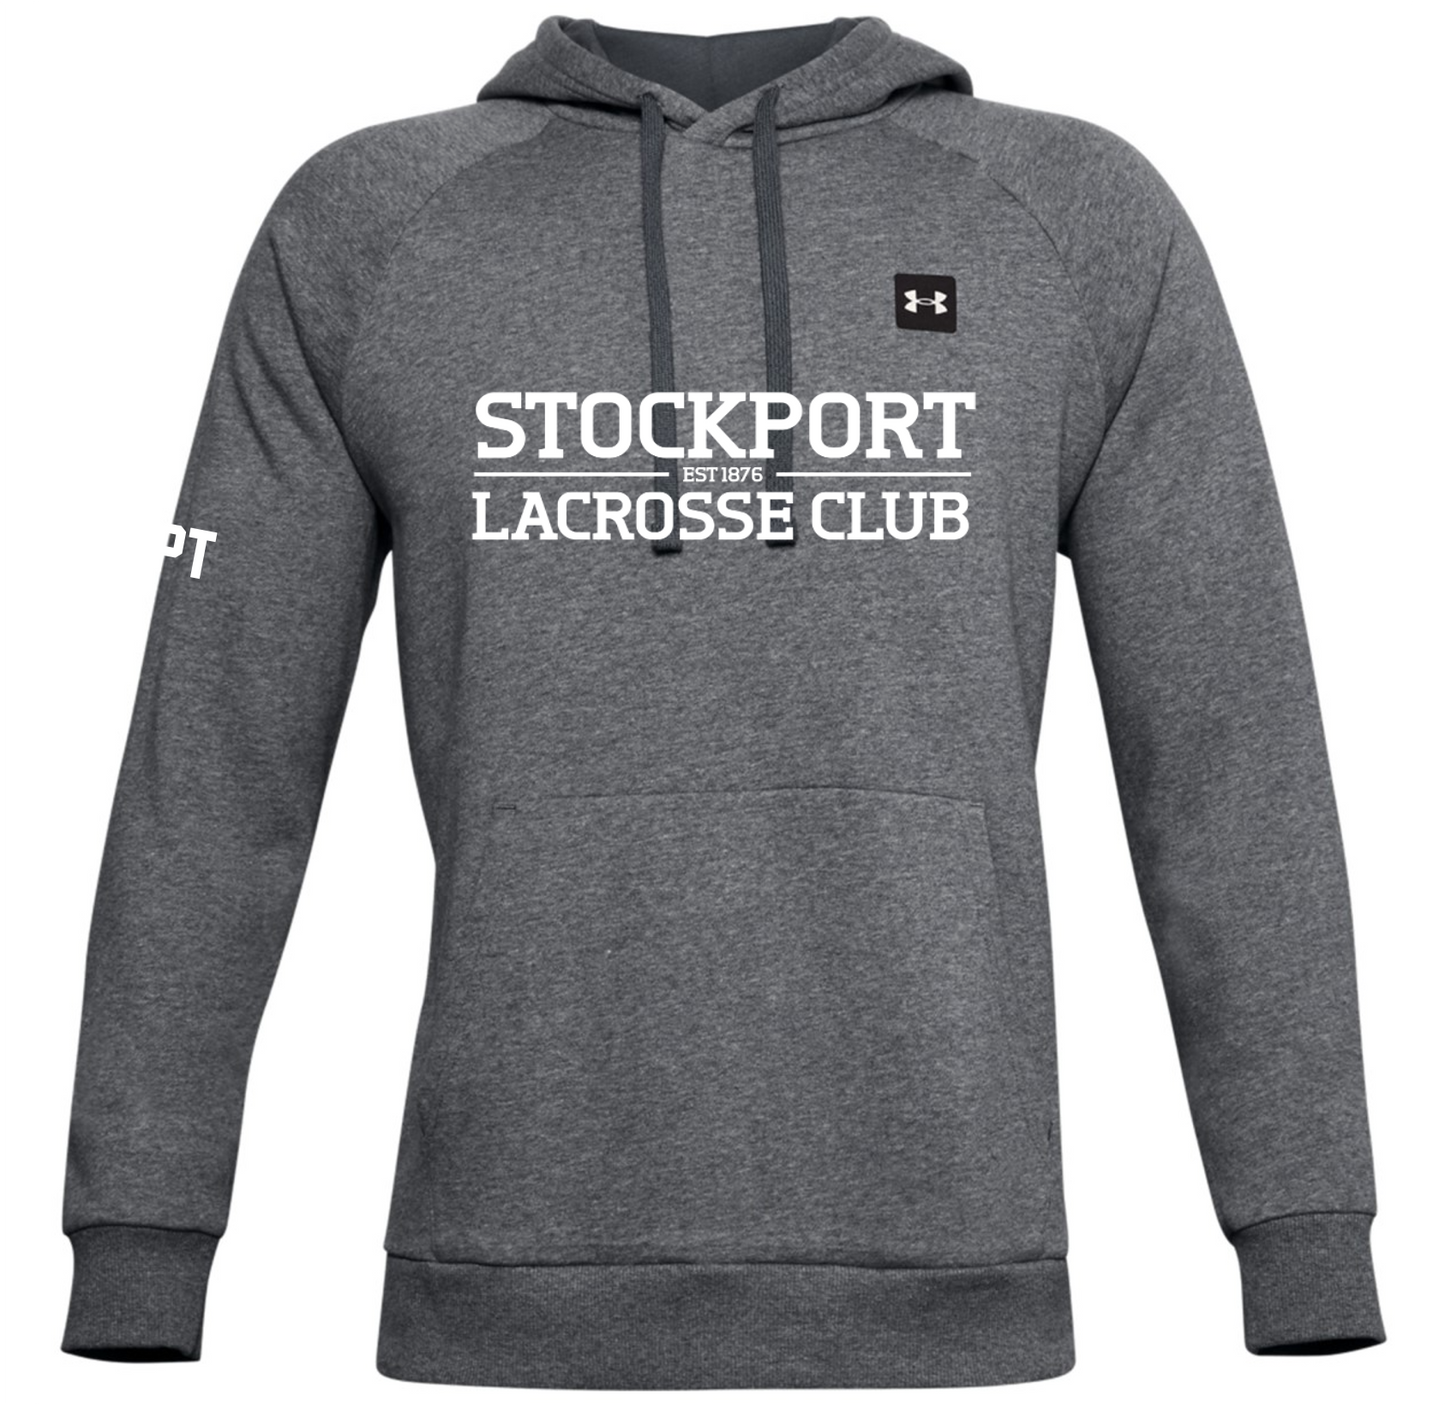 Stockport LC Under Armour Rival Fleece Hoodie